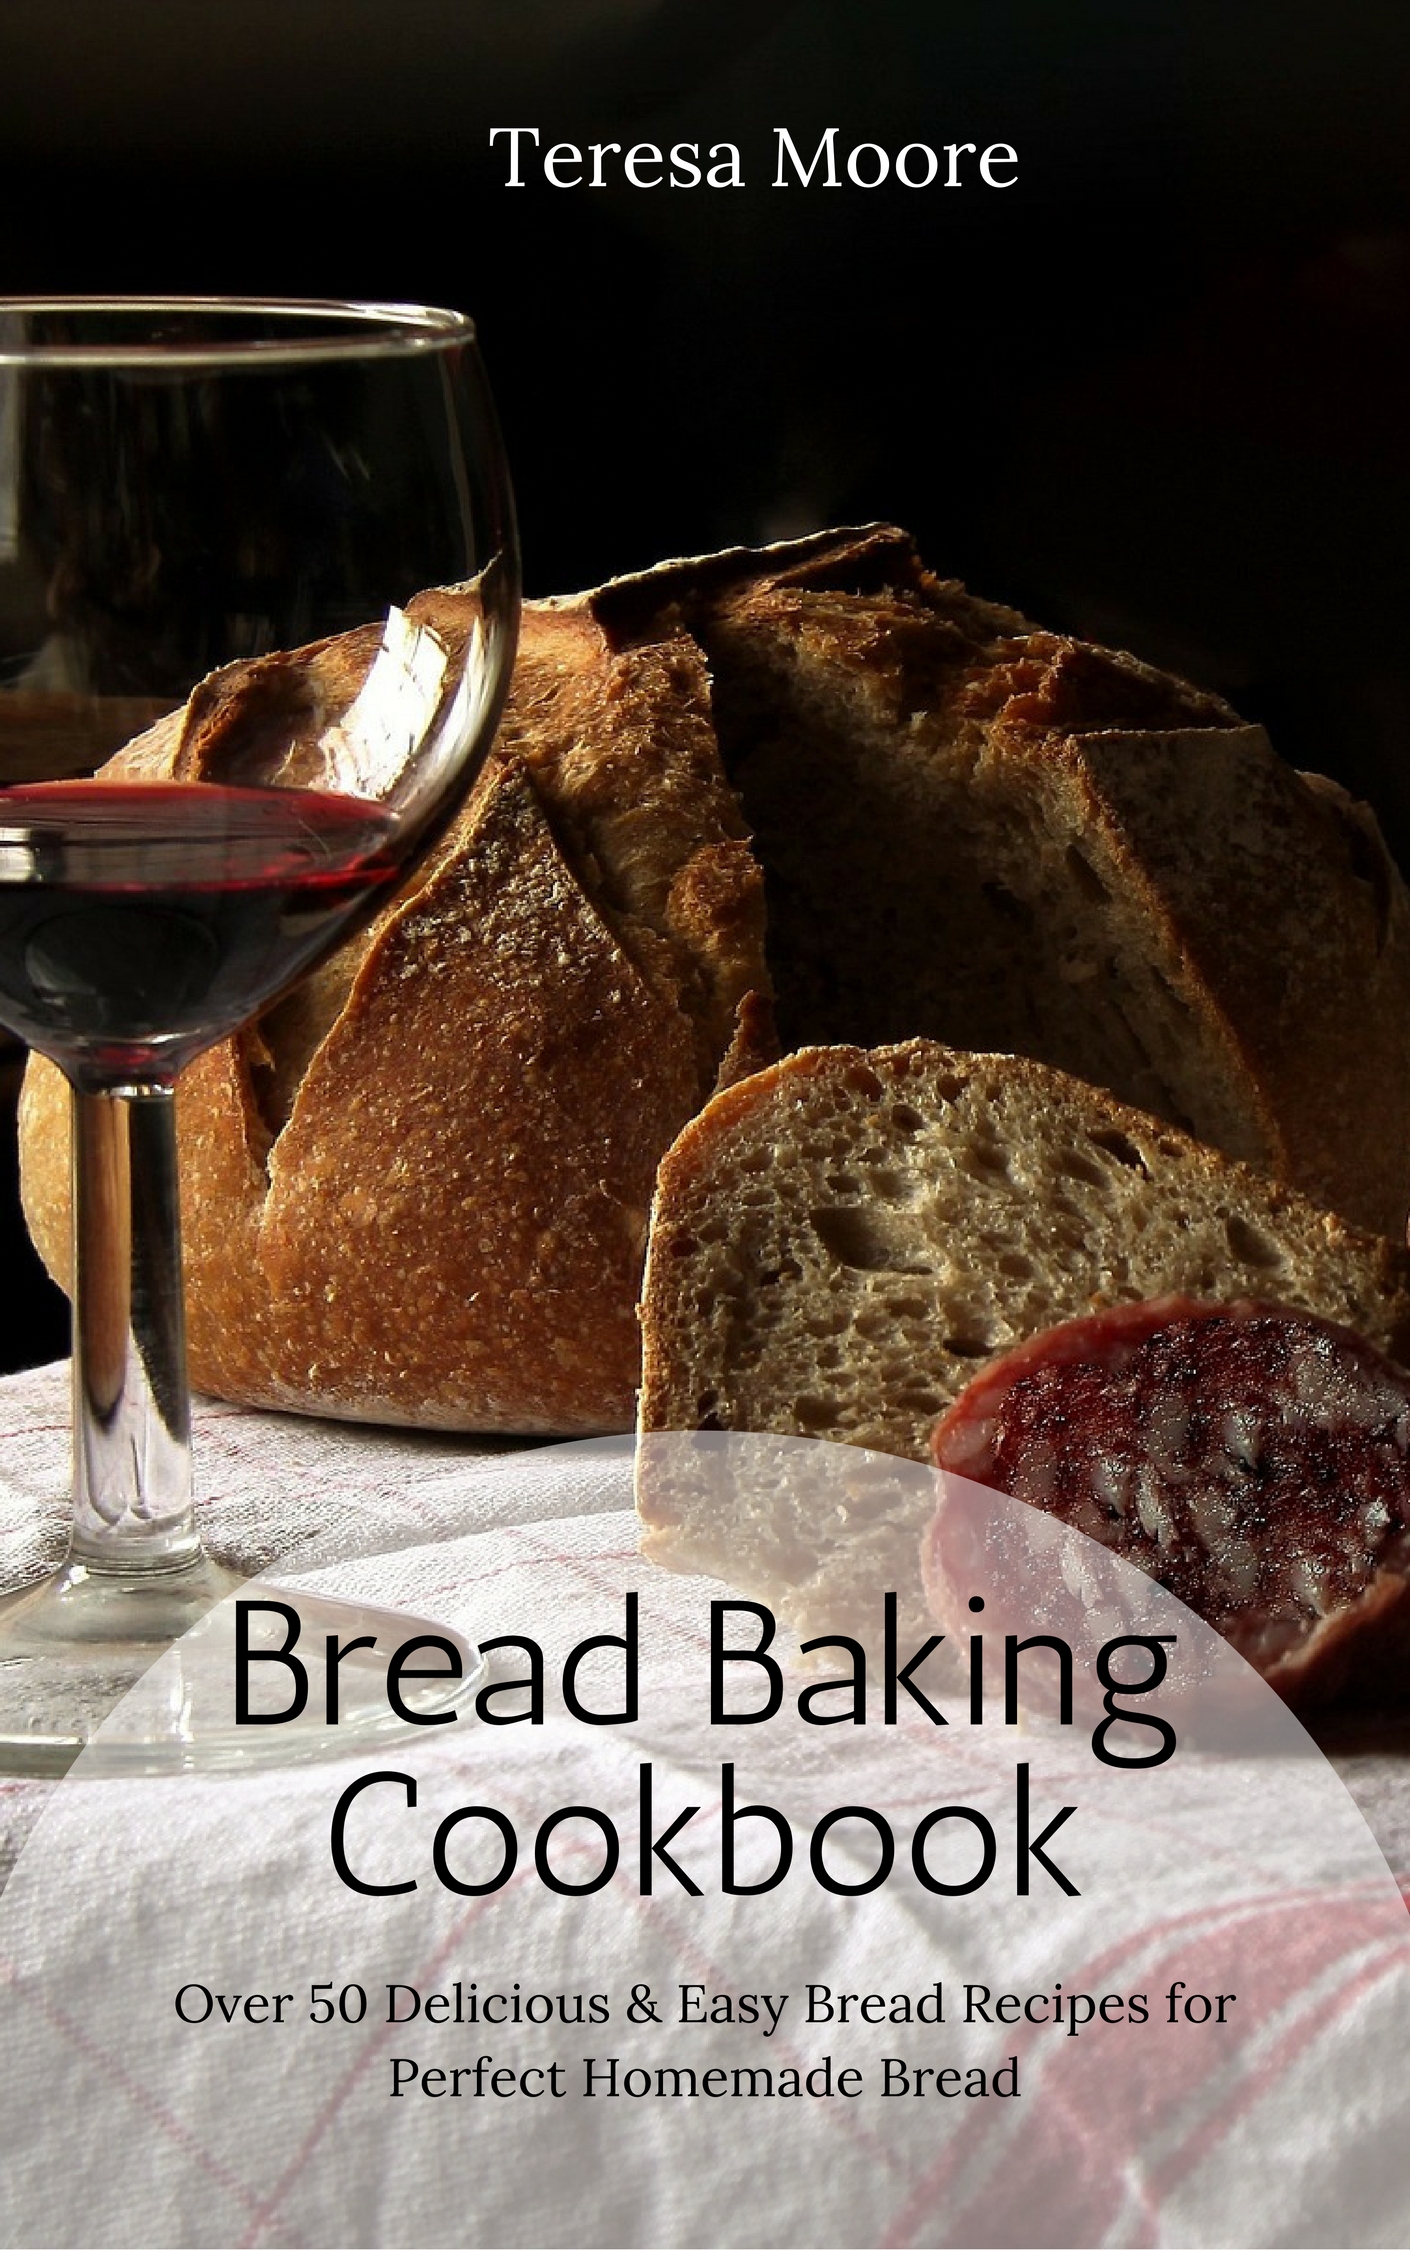 FREE: Bread Baking Cookbook: Over 50 Delicious & Easy Bread Recipes for Perfect Homemade Bread by Teresa Moore